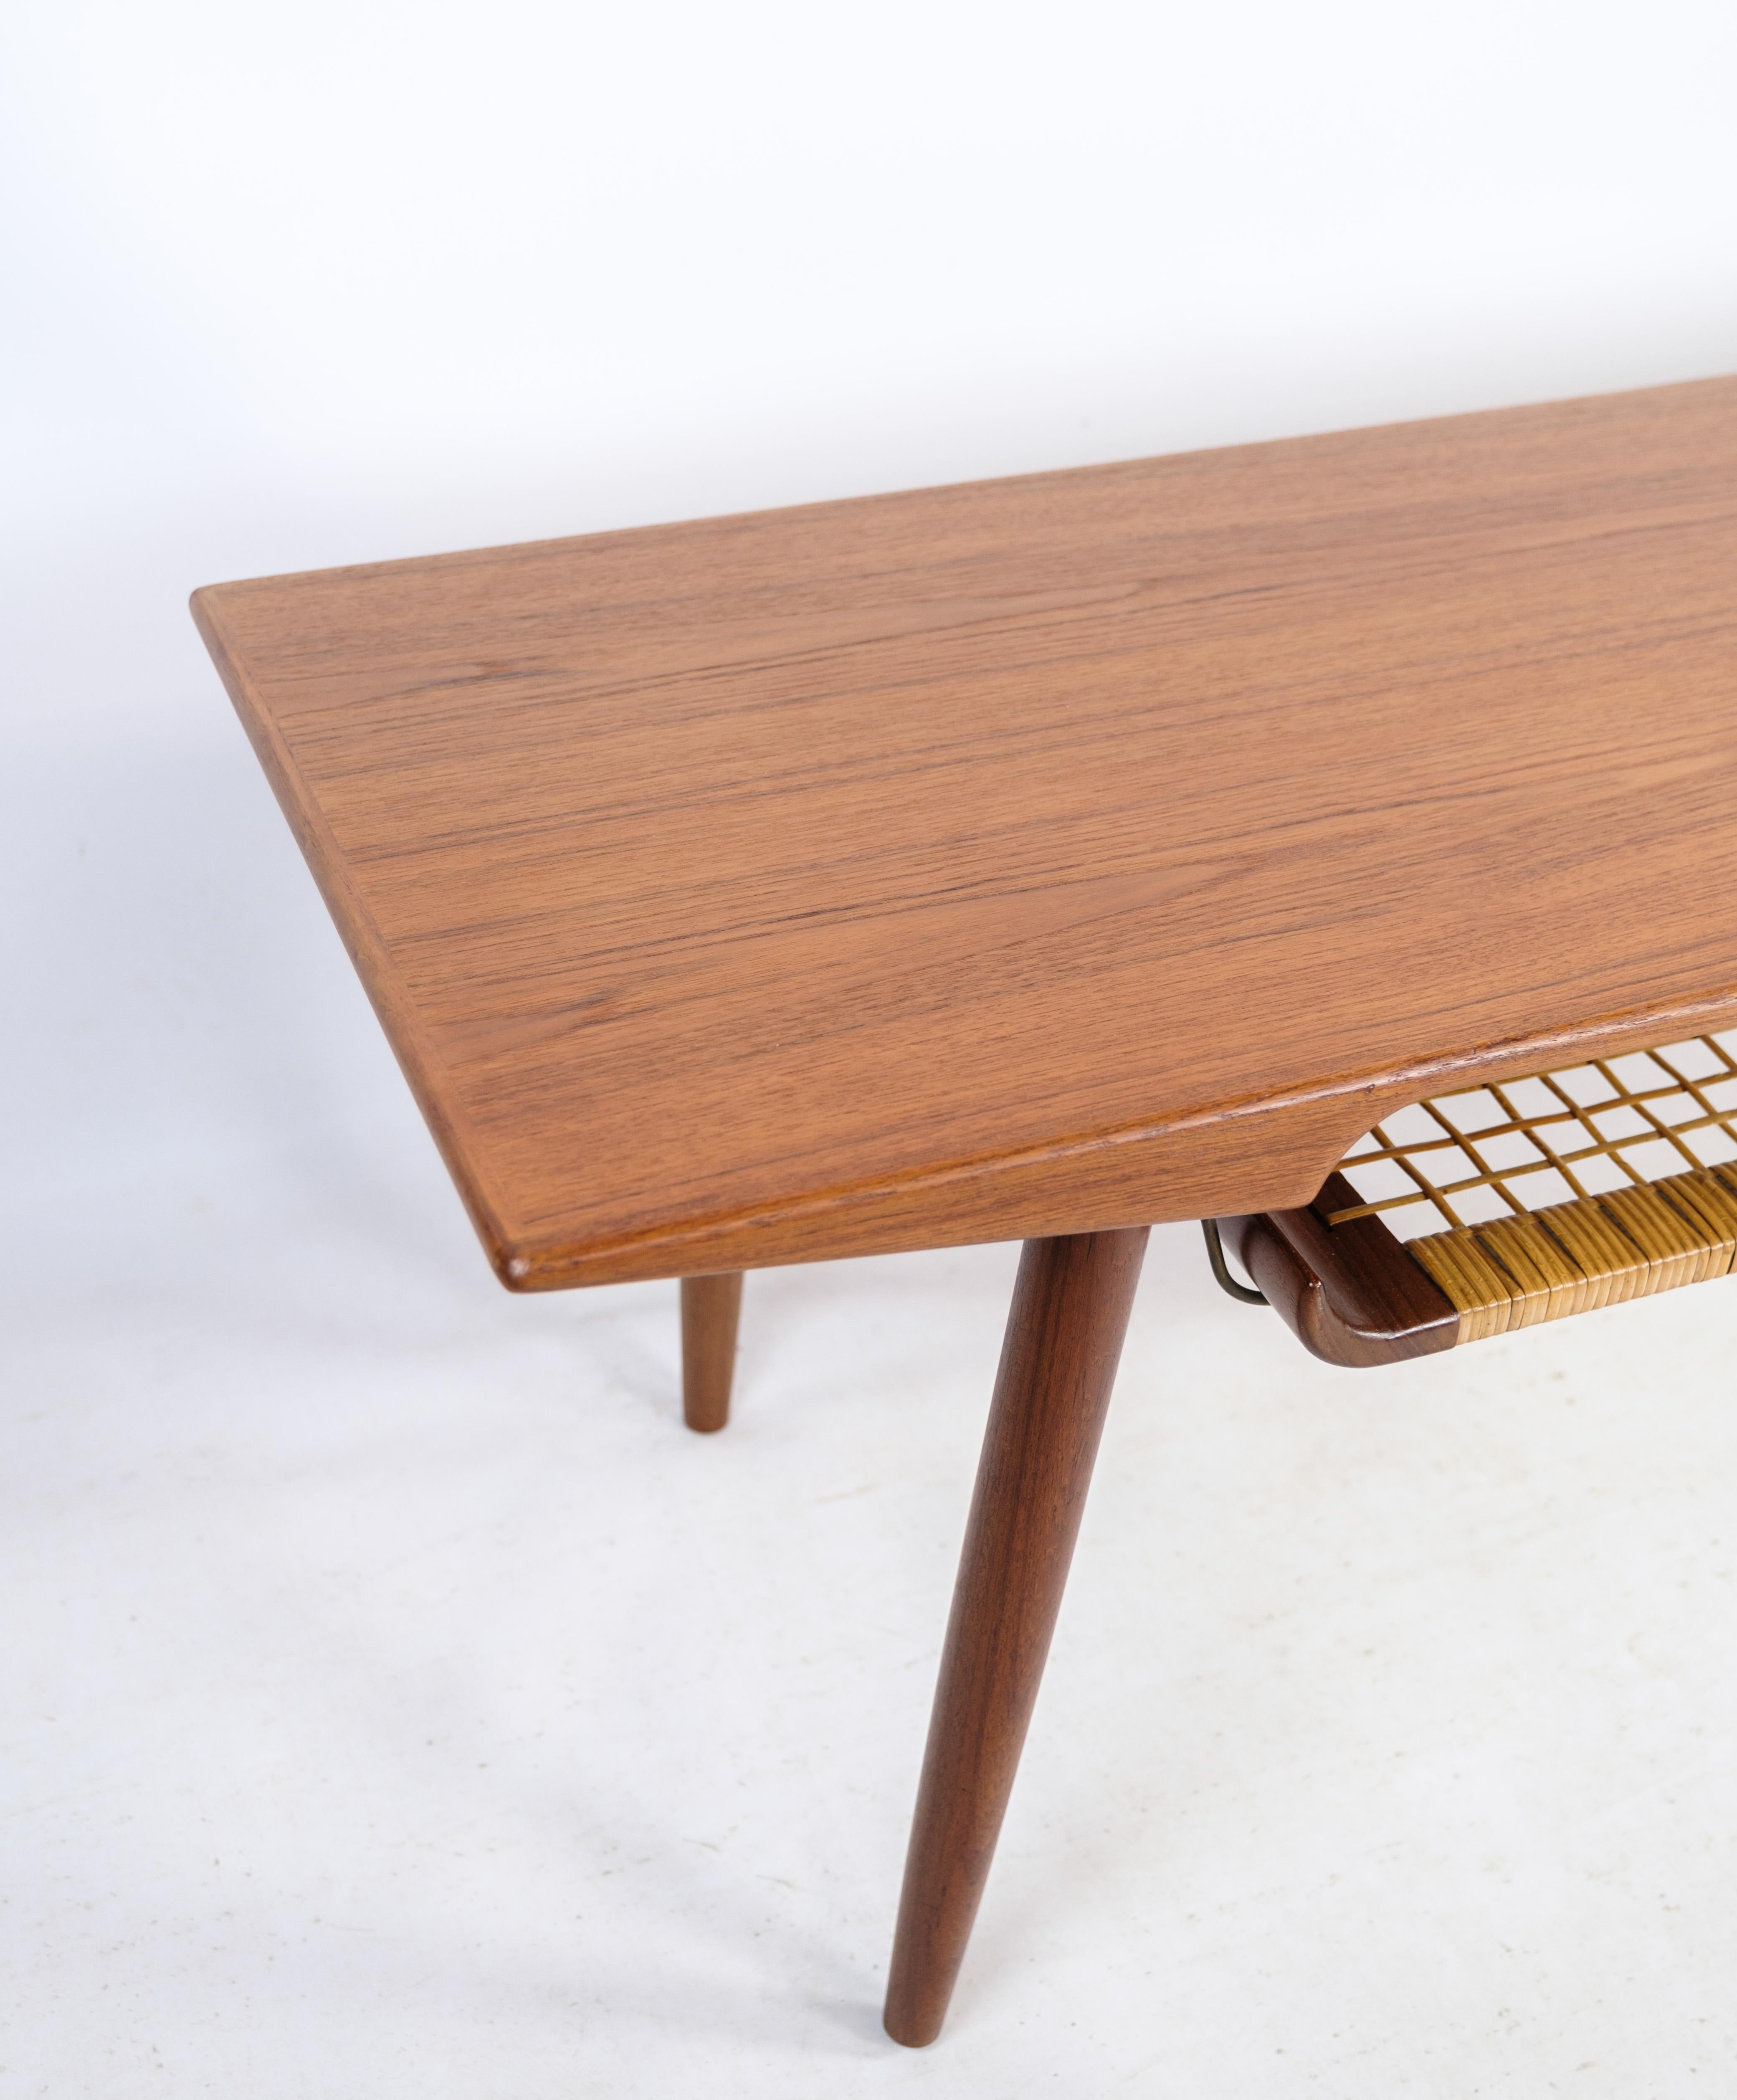 Coffee table in teak and paper cord shelf of danish design from the 1960s. The table is in great vintage condition.
Measures: H - 51 cm, W - 152 cm and D - 50 cm.